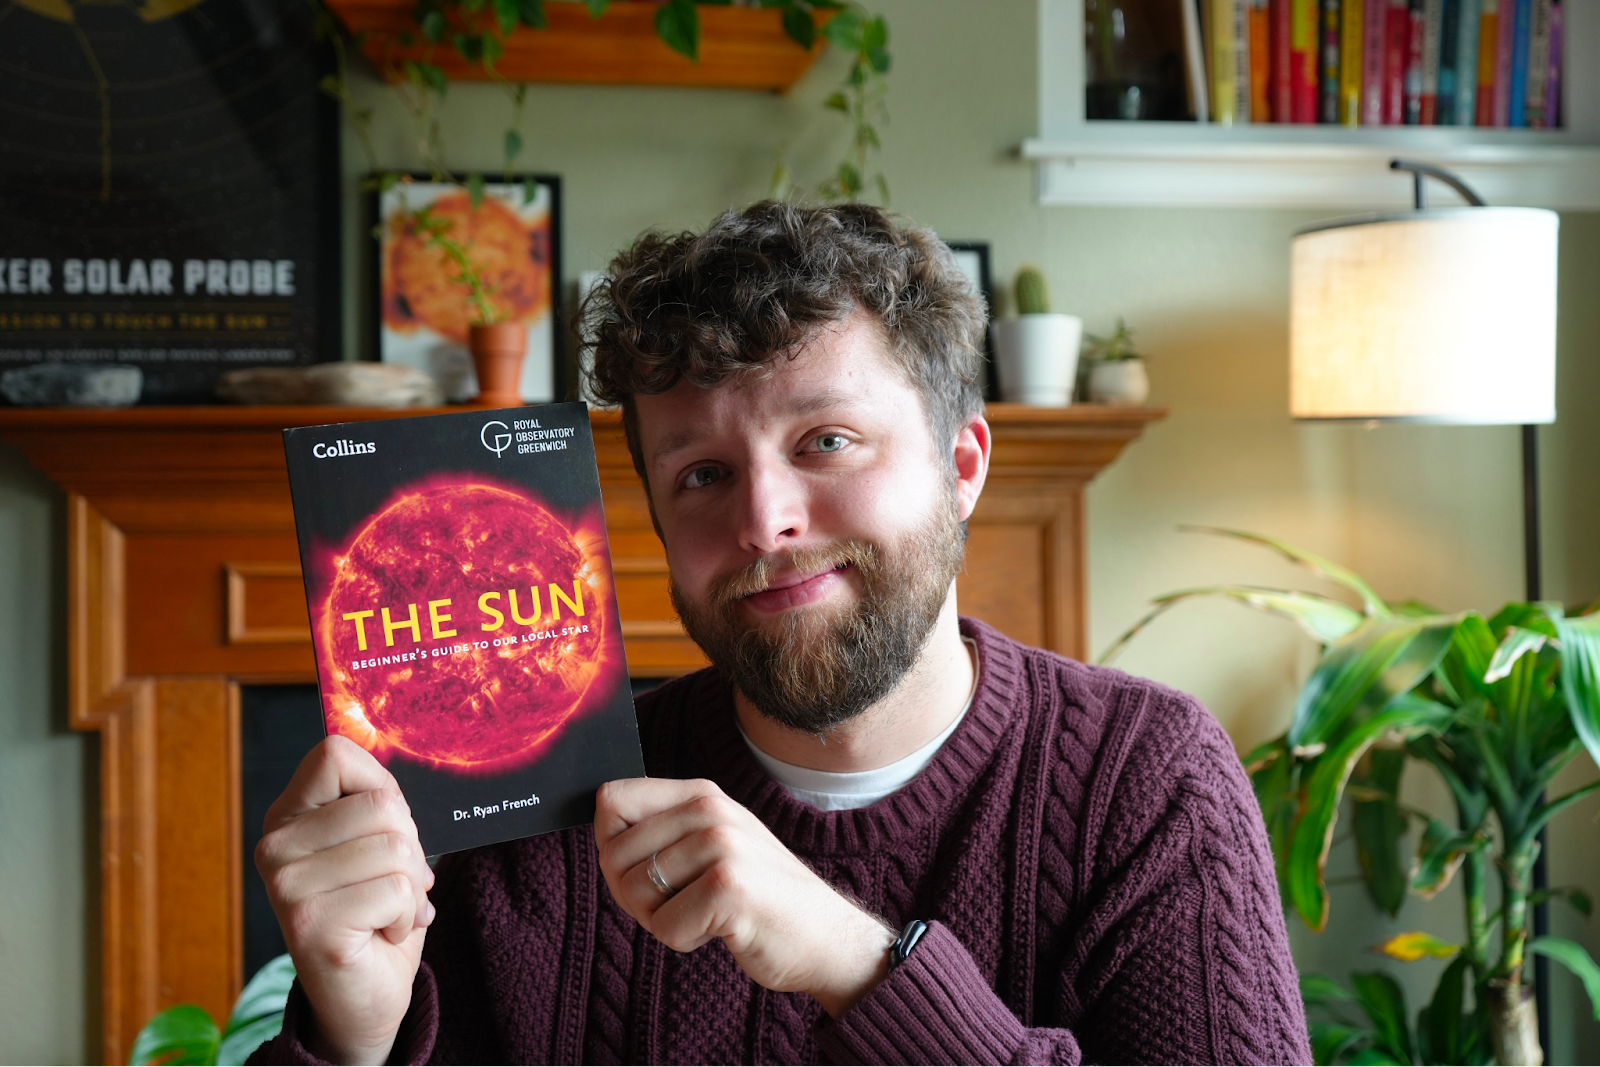 A man with brown curly hair and a beard wearing a burgundy cable knit sweater, holding up a copy of the book The Sun. The book is black with a bright orange and red image of the sun, and "the sun" in all caps yellow text.